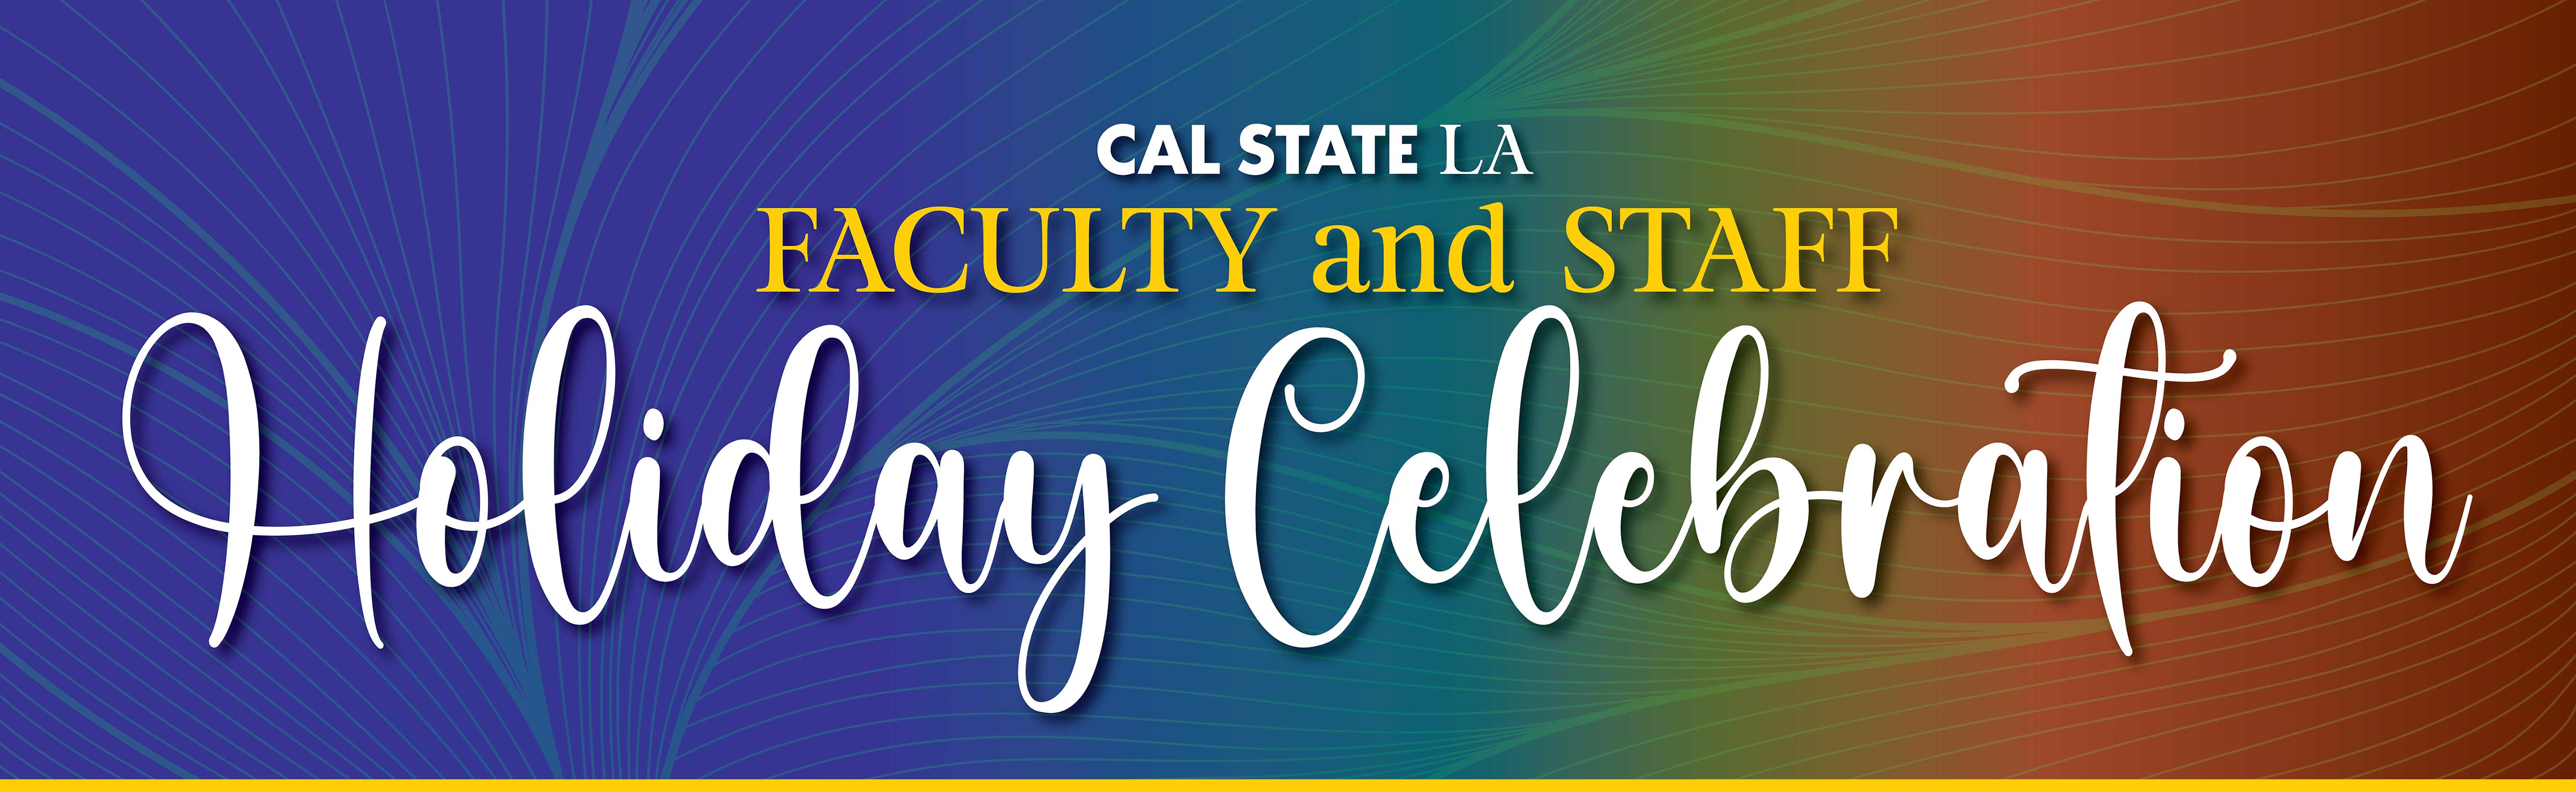 Cal State LA Faculty and Staff Holiday Celebration